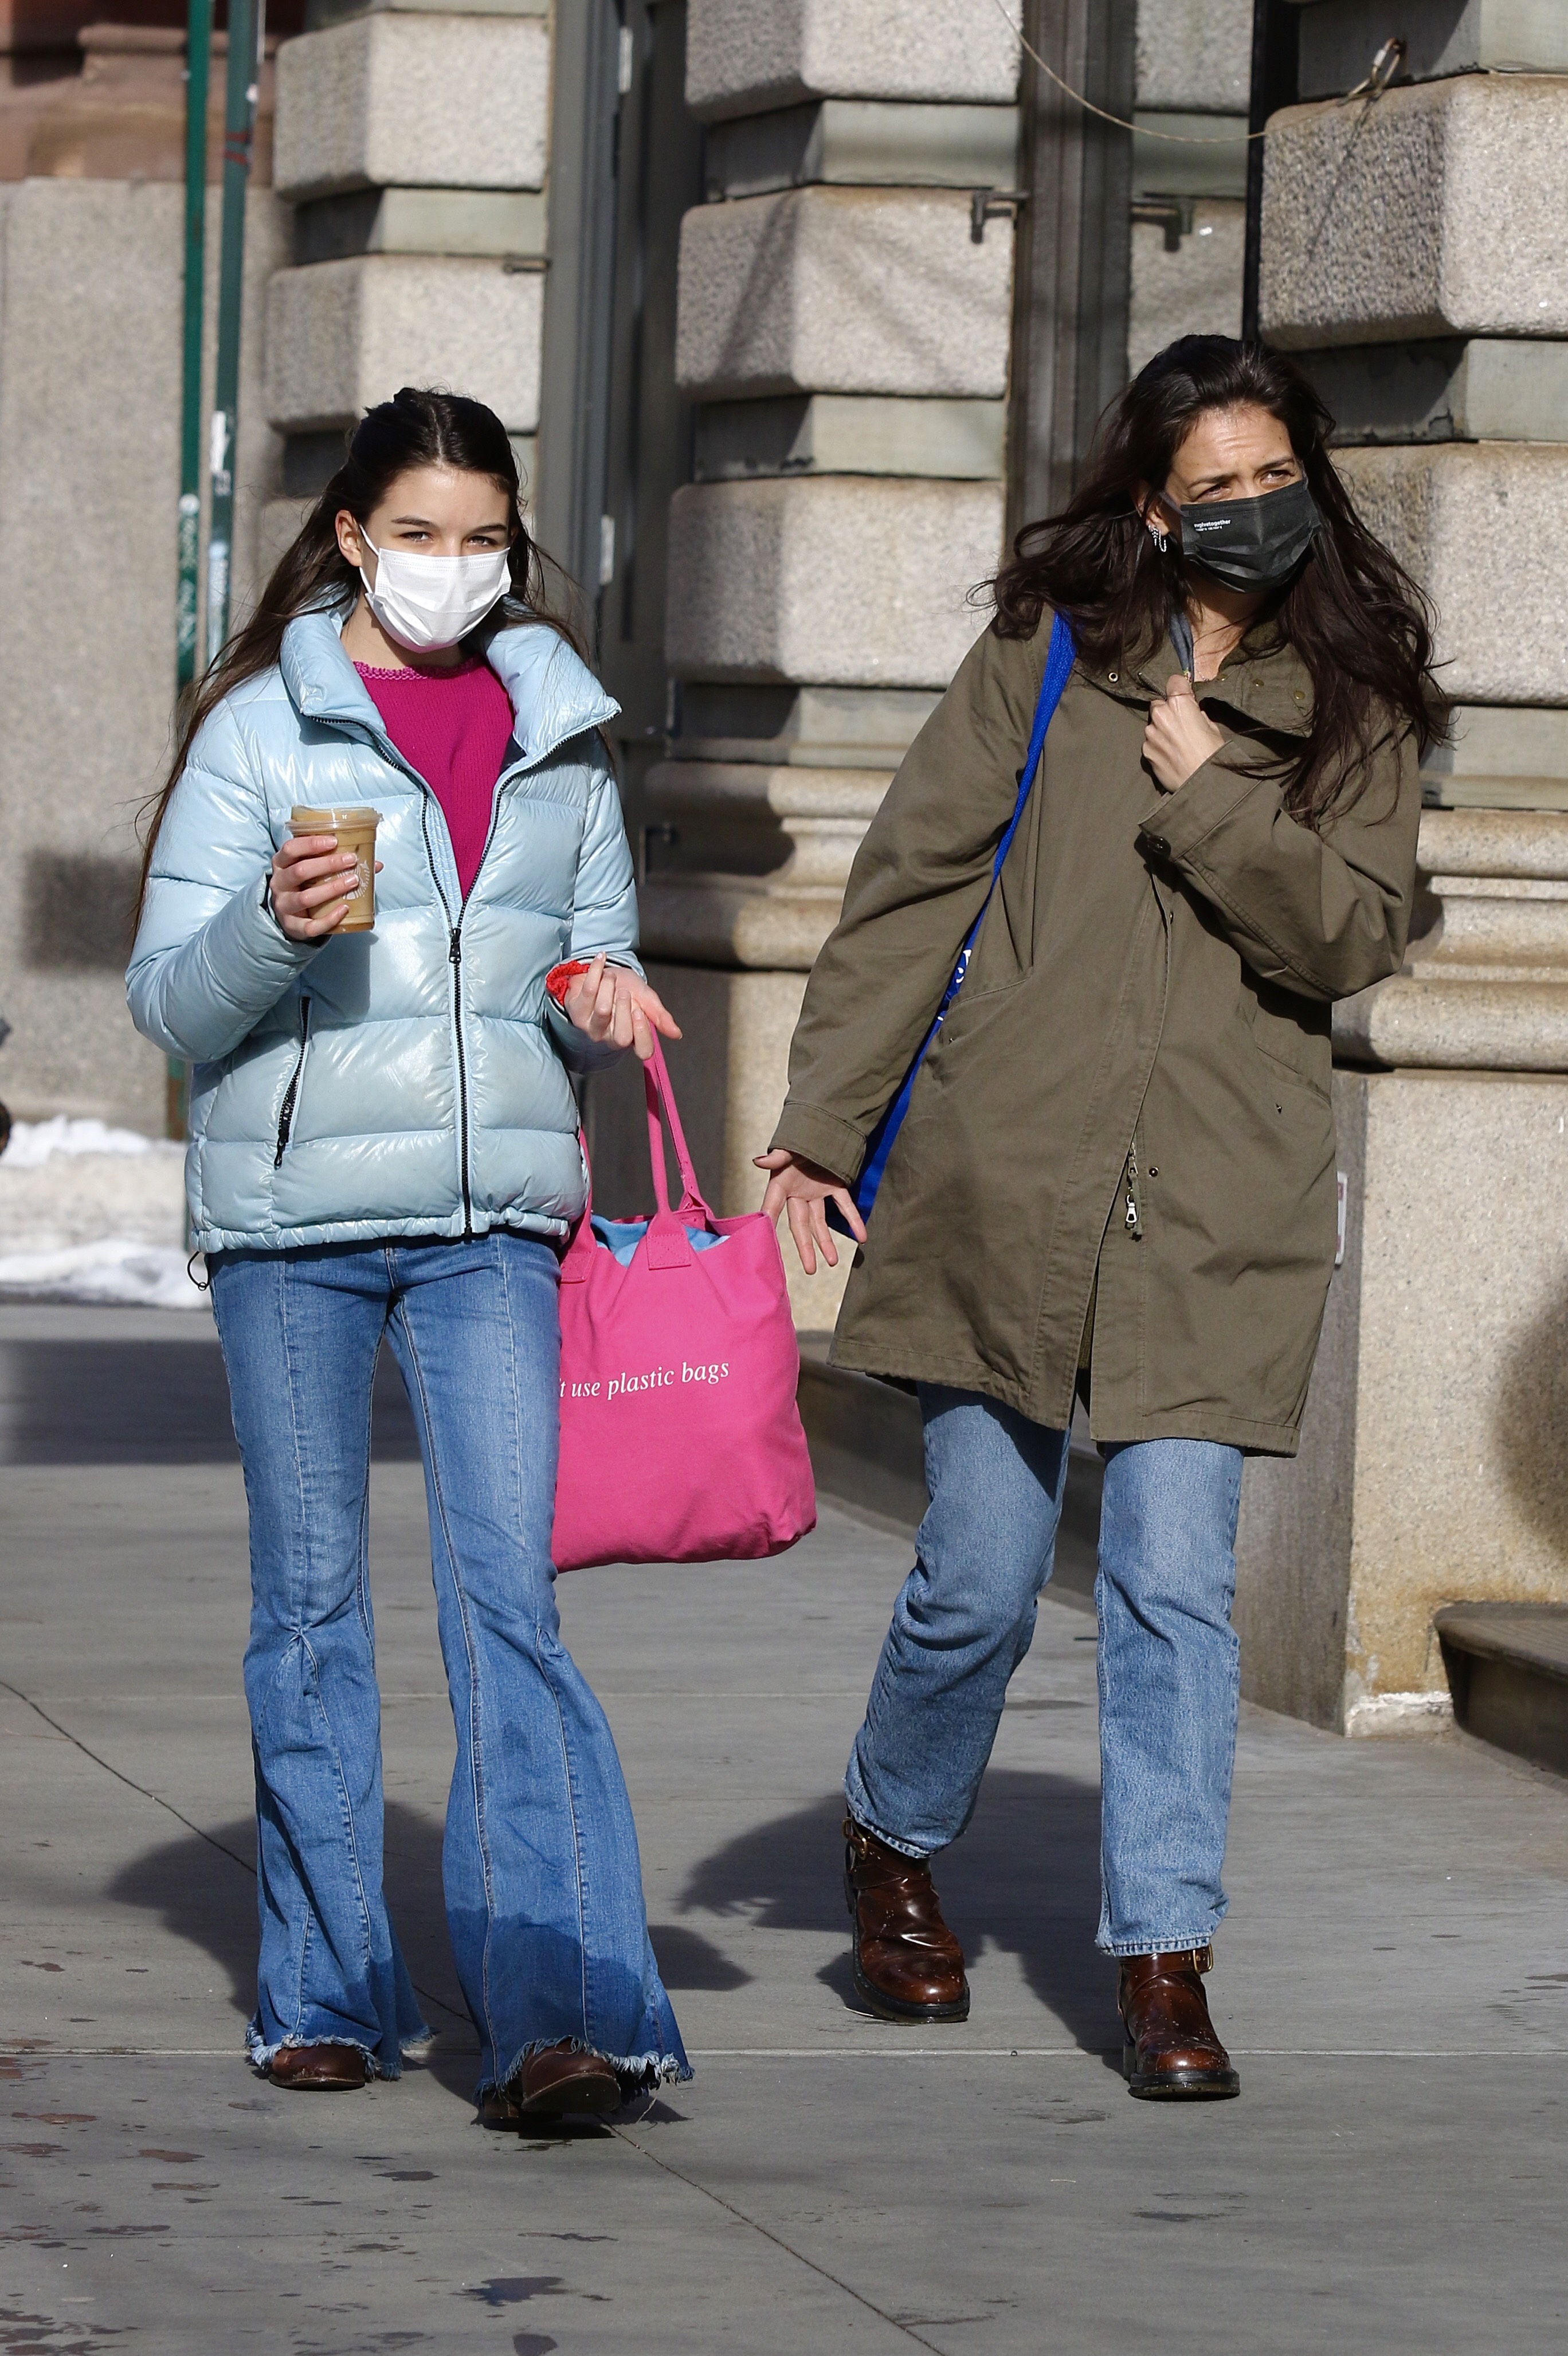 Katie Holmes and Suri Cruise on February 6, 2021 in New York City, New York. | Source: Getty Images